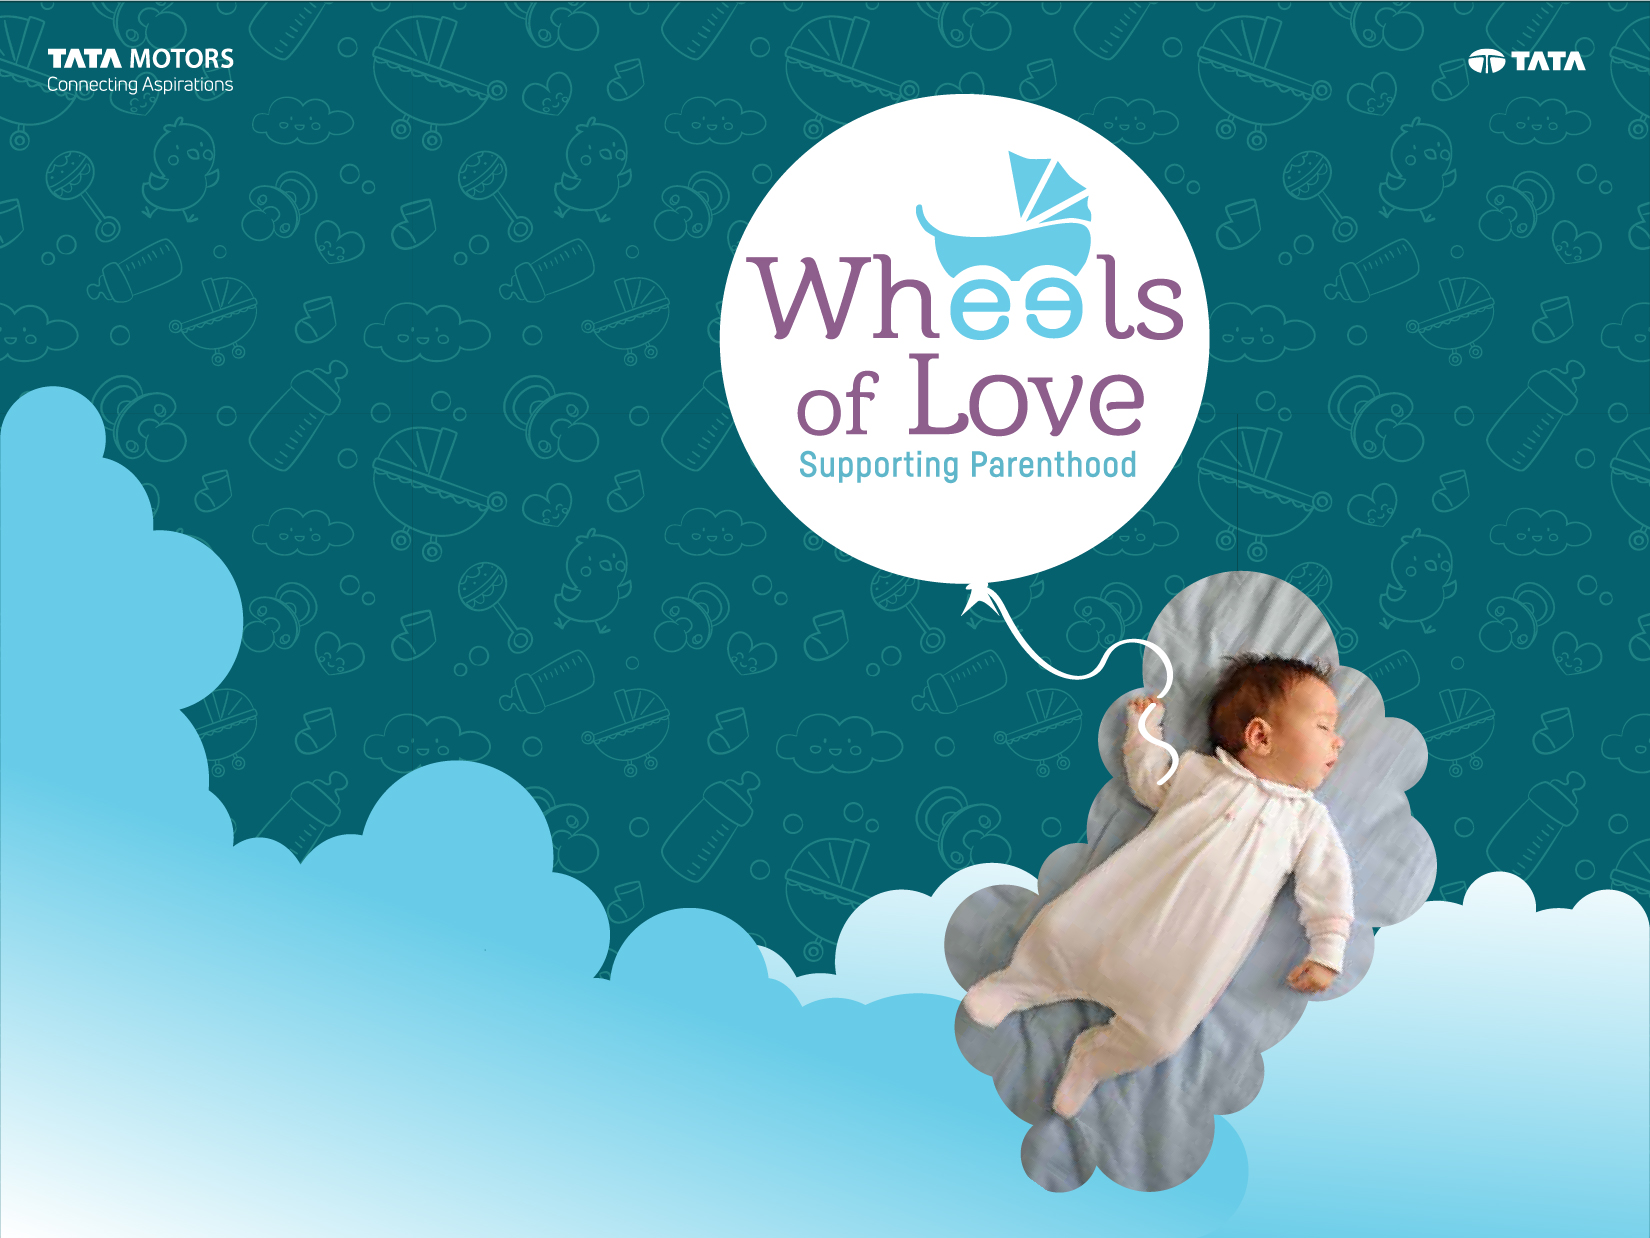 Tata Motors launches ‘Wheels of Love’, a holistic programme to support parenthood